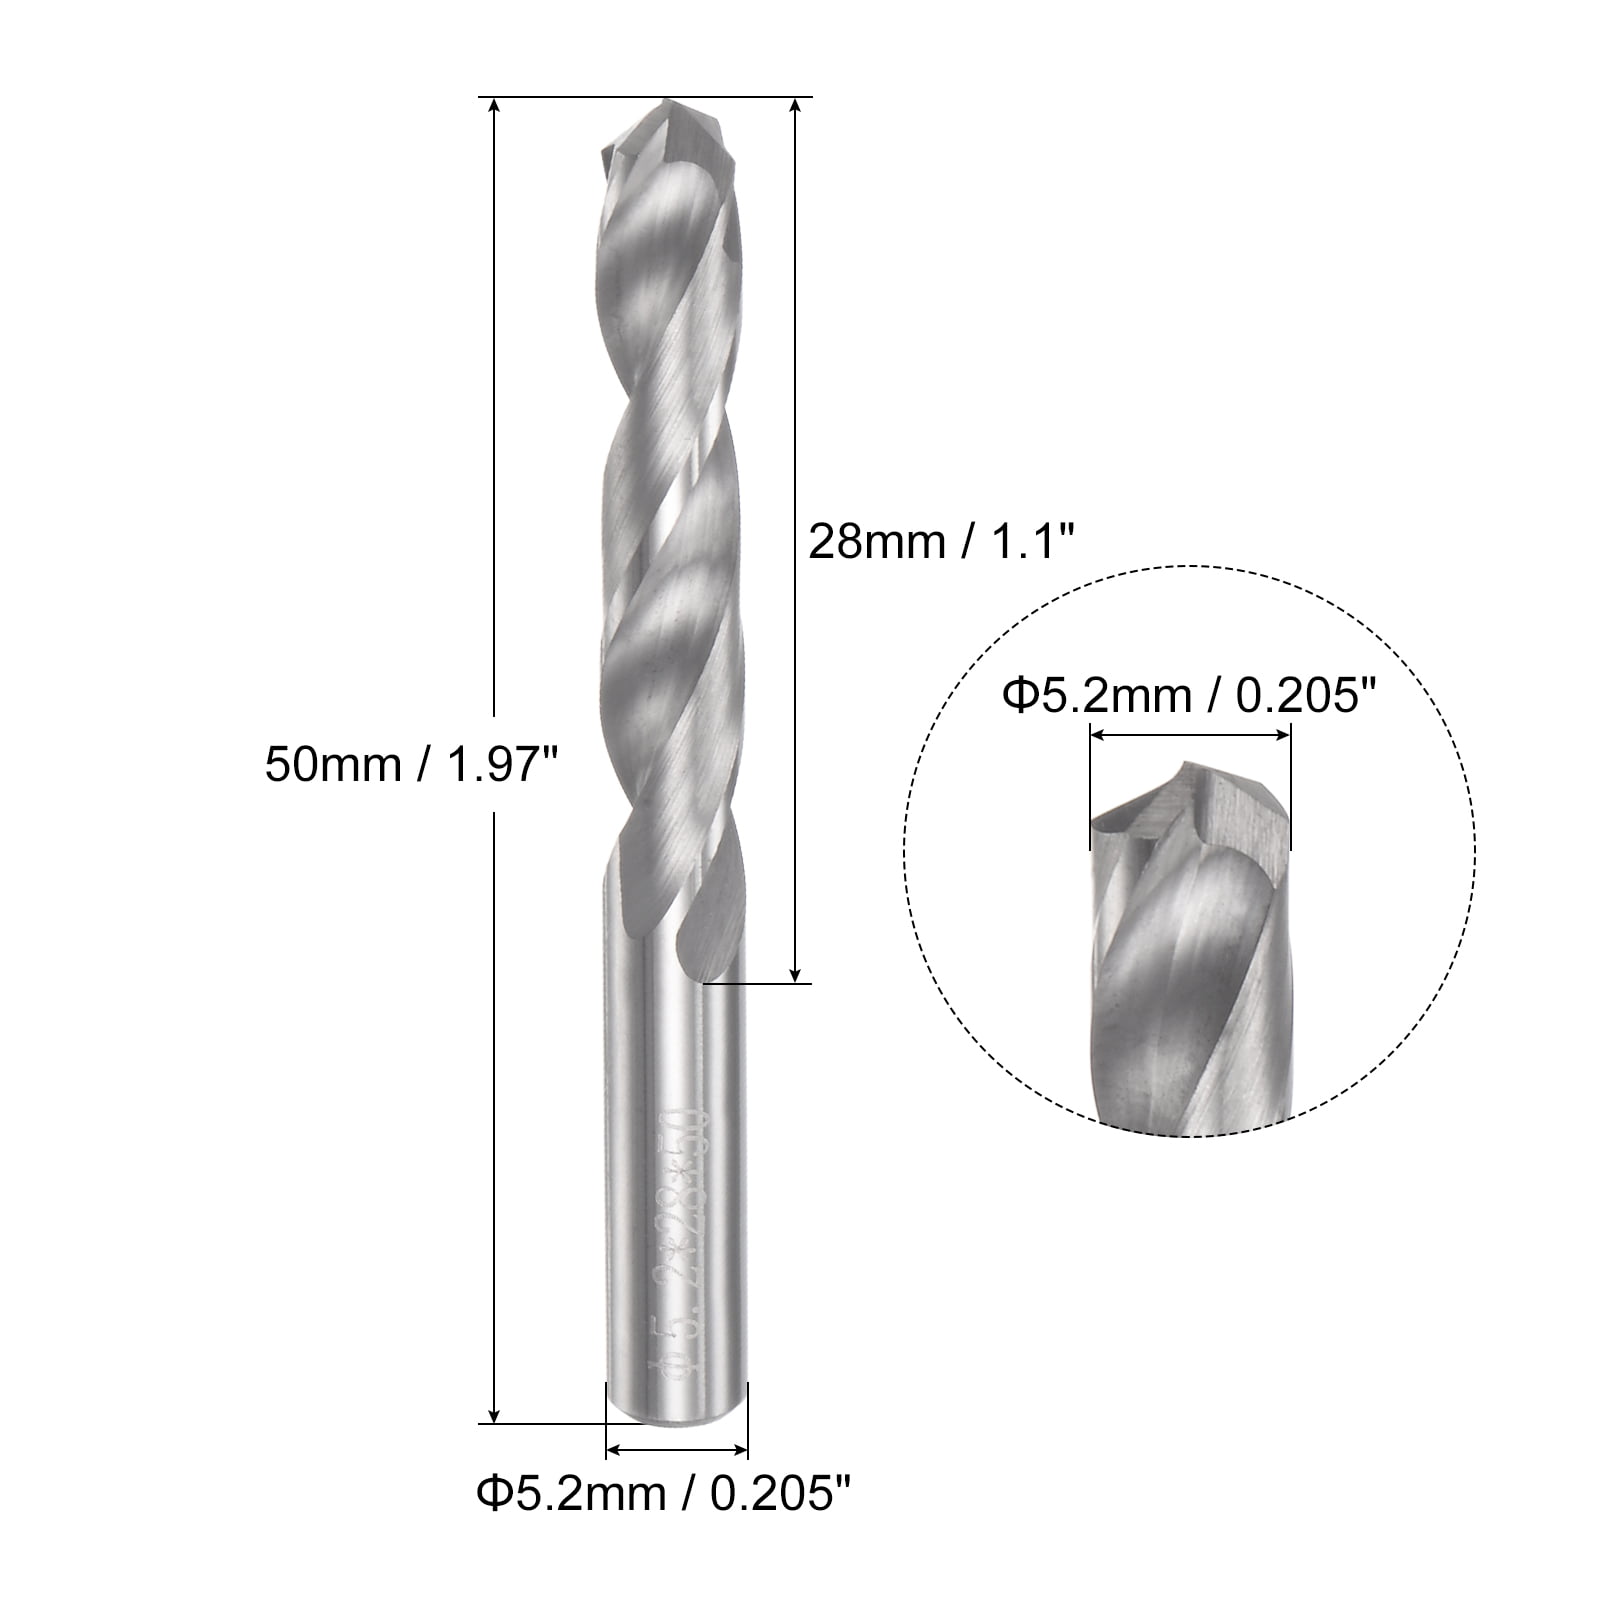 uxcell Reduced Shank Twist Drill Bits 4.5mm High Speed Steel 4341 with 4.5mm Shank 5 Pcs 